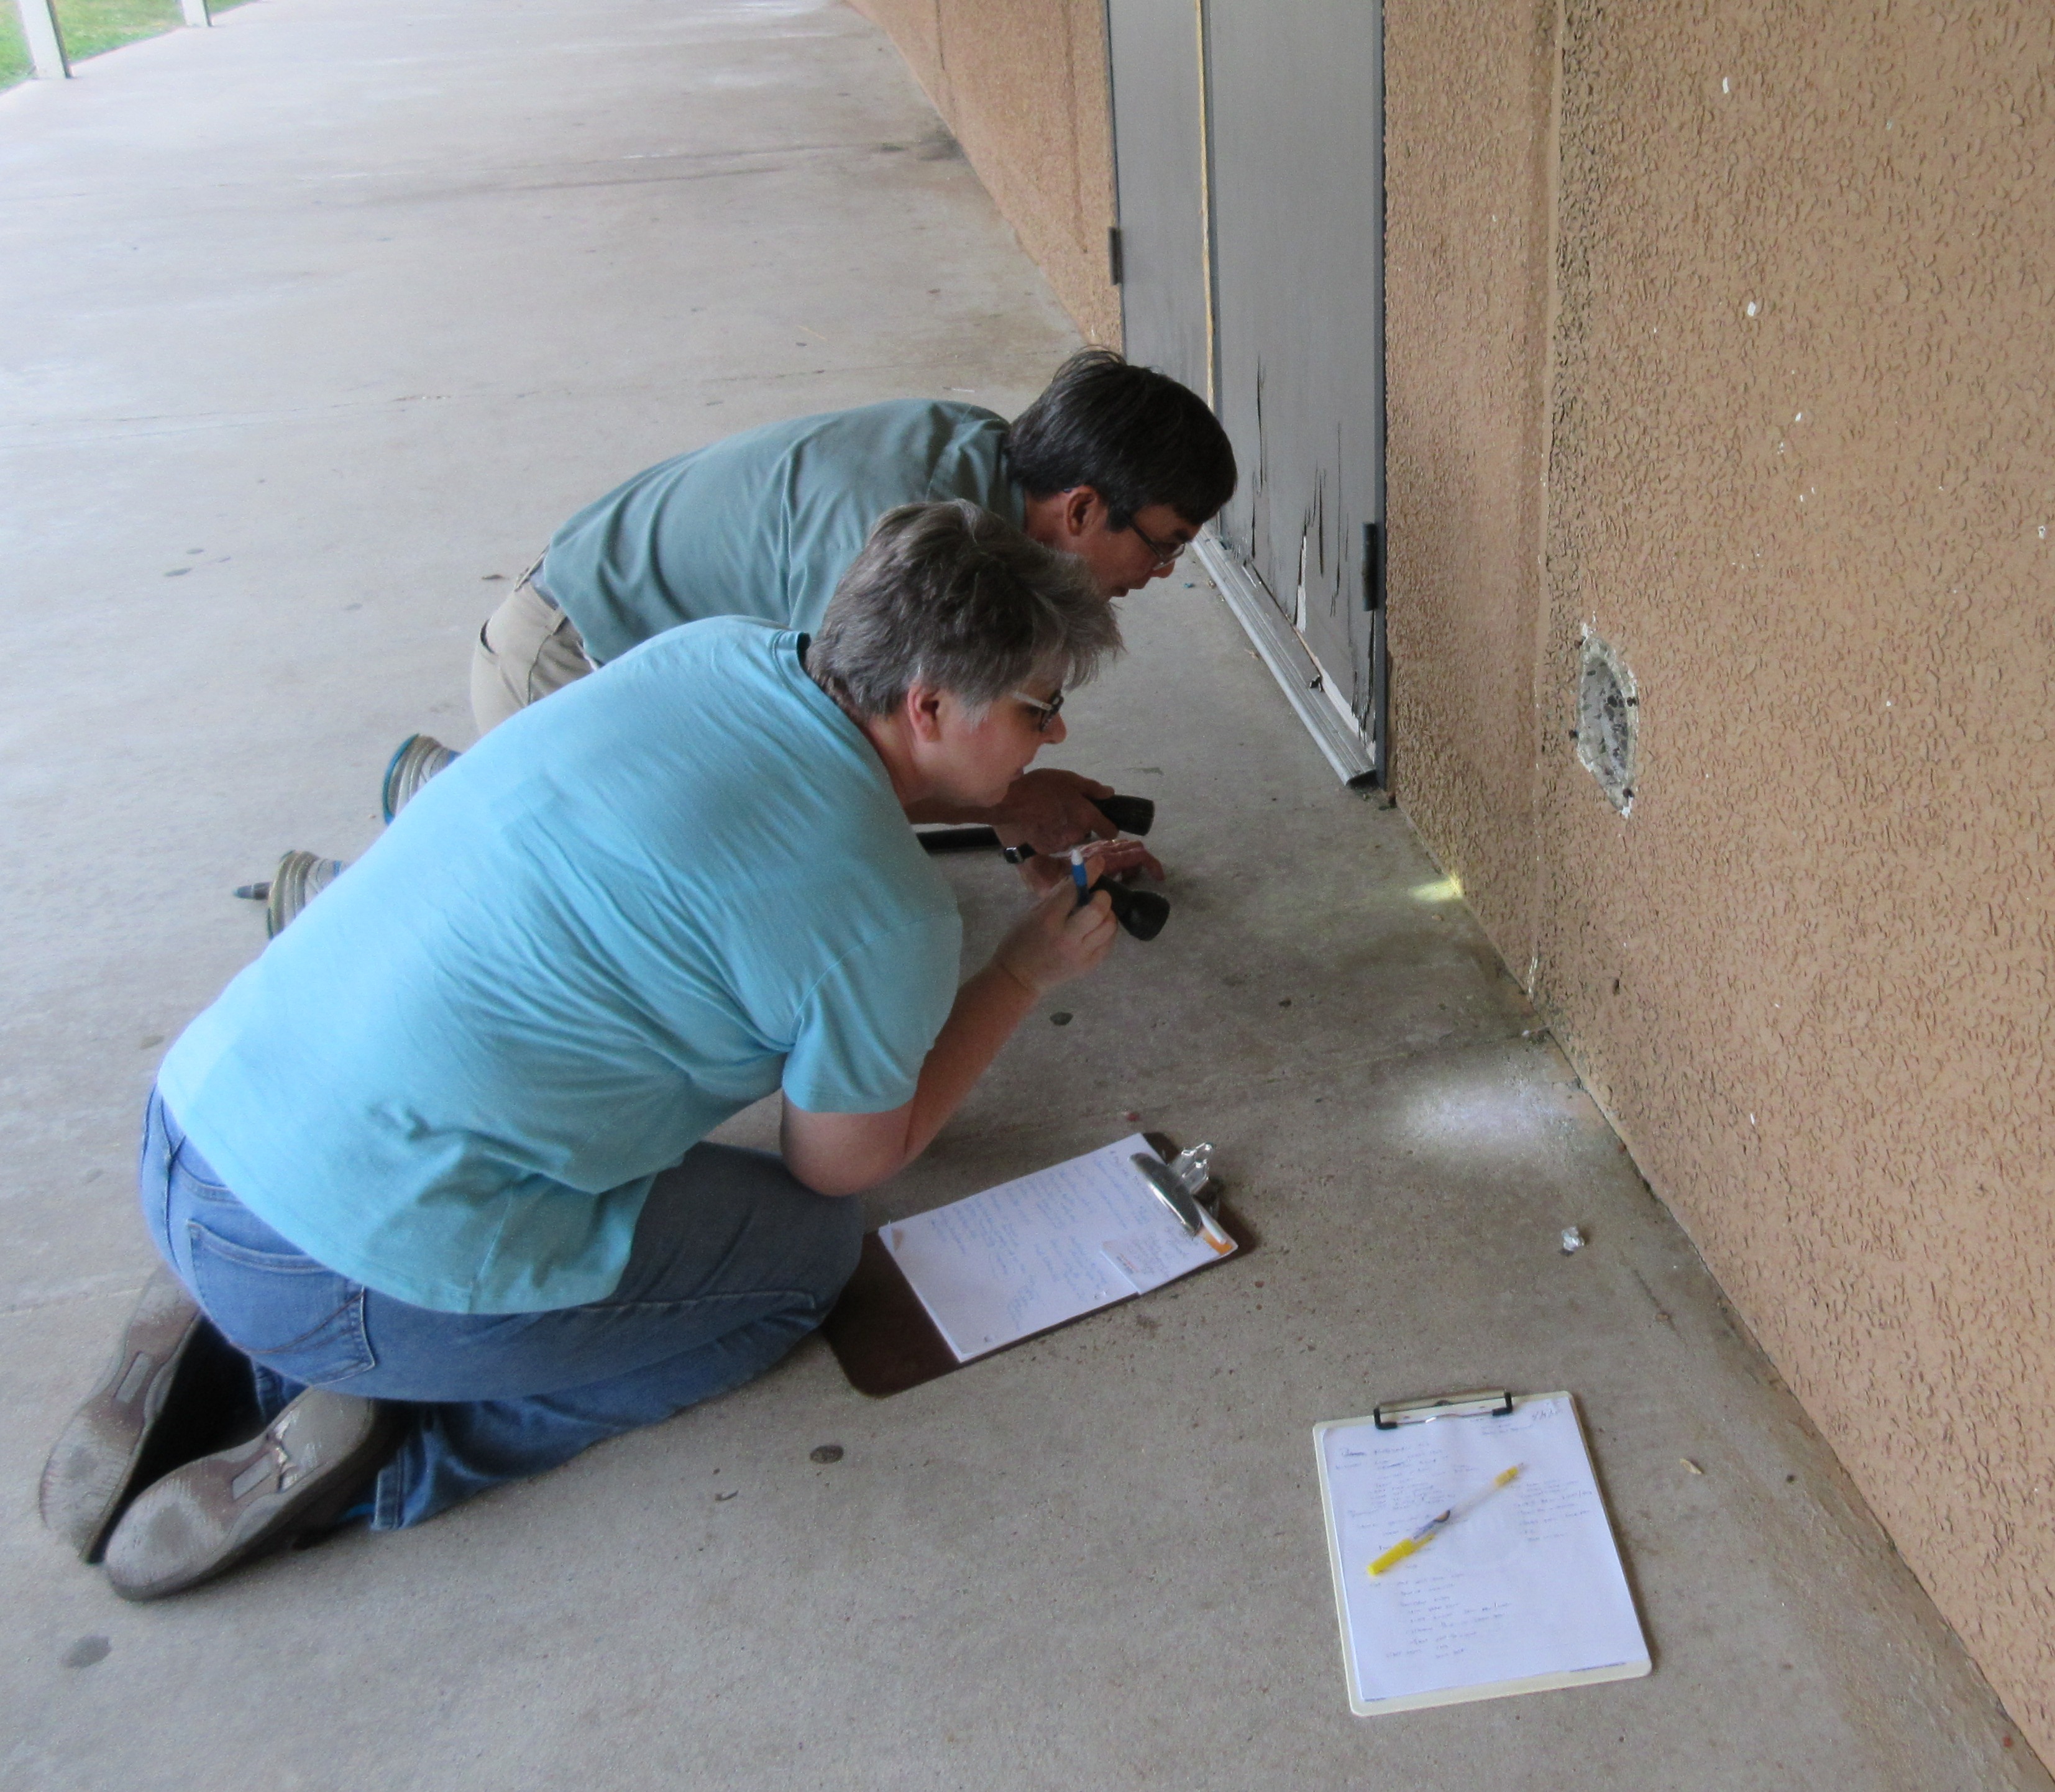 two people, a woman and a man, conduct a school pest management inspection at a school, looking for ants with flashlights.